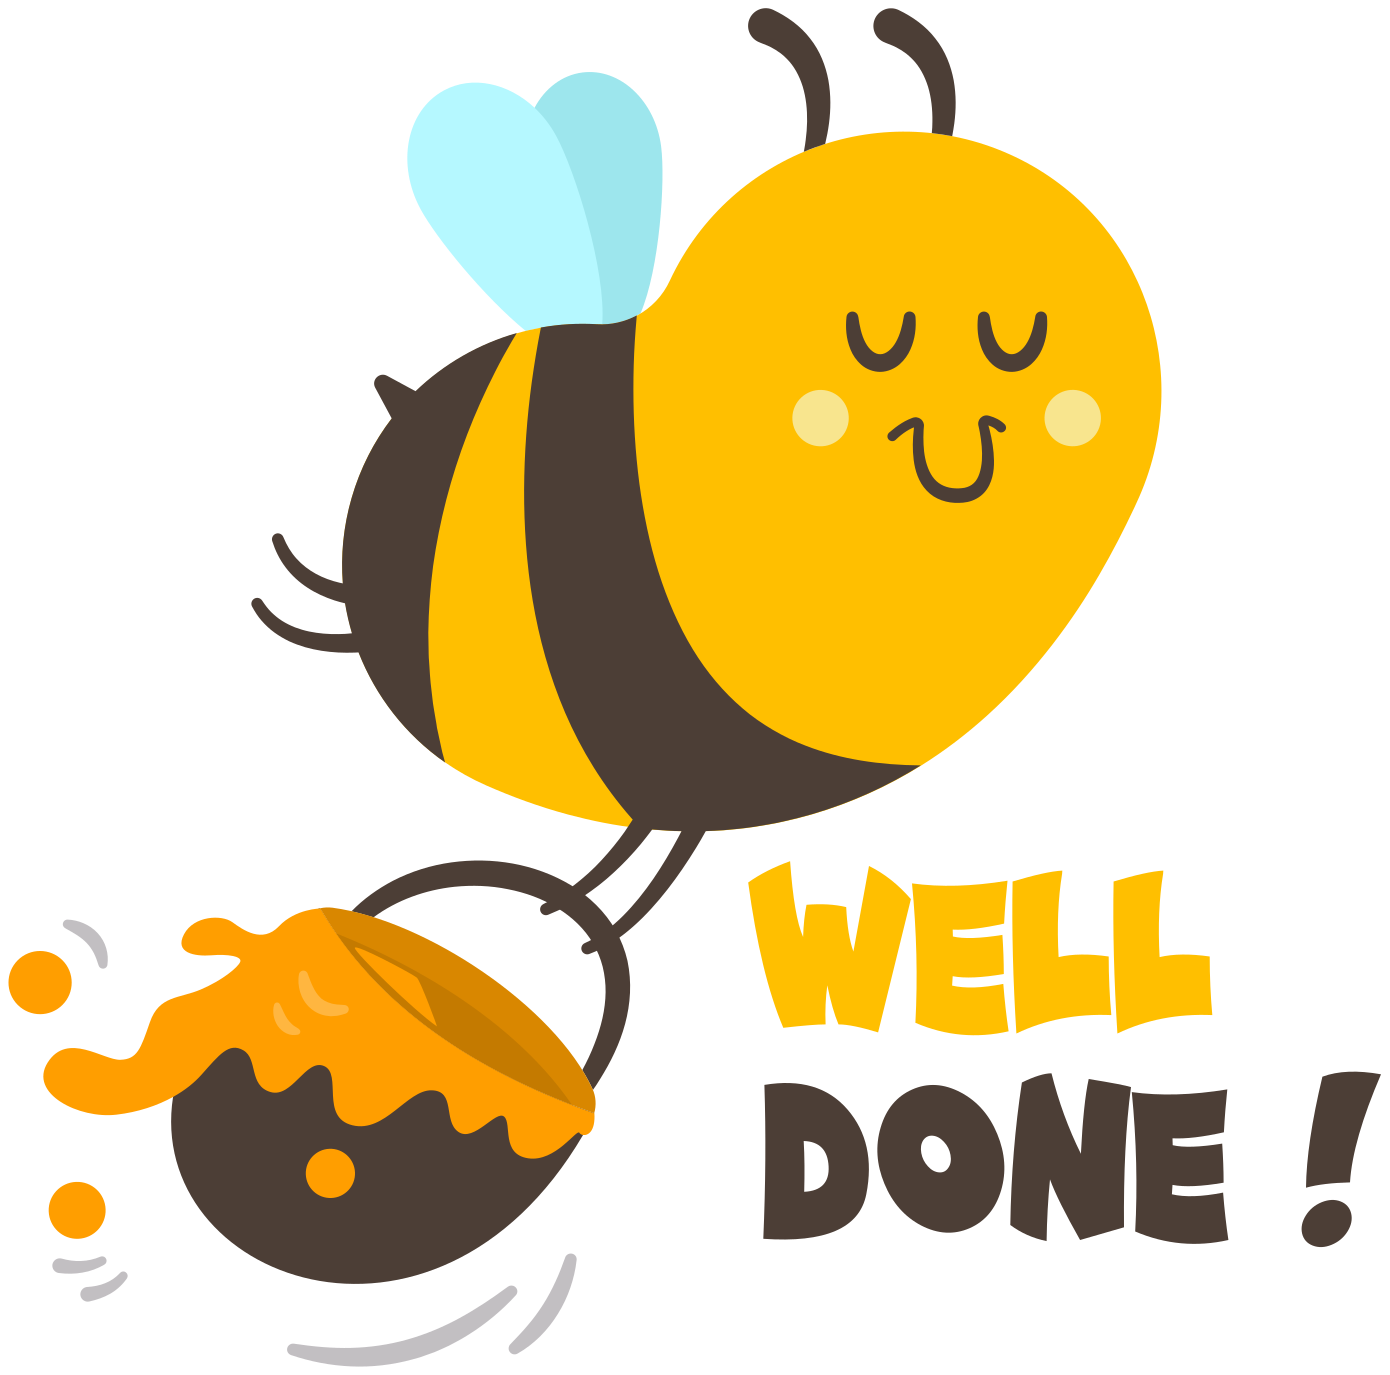 Busy bee well done educational decal - TenStickers